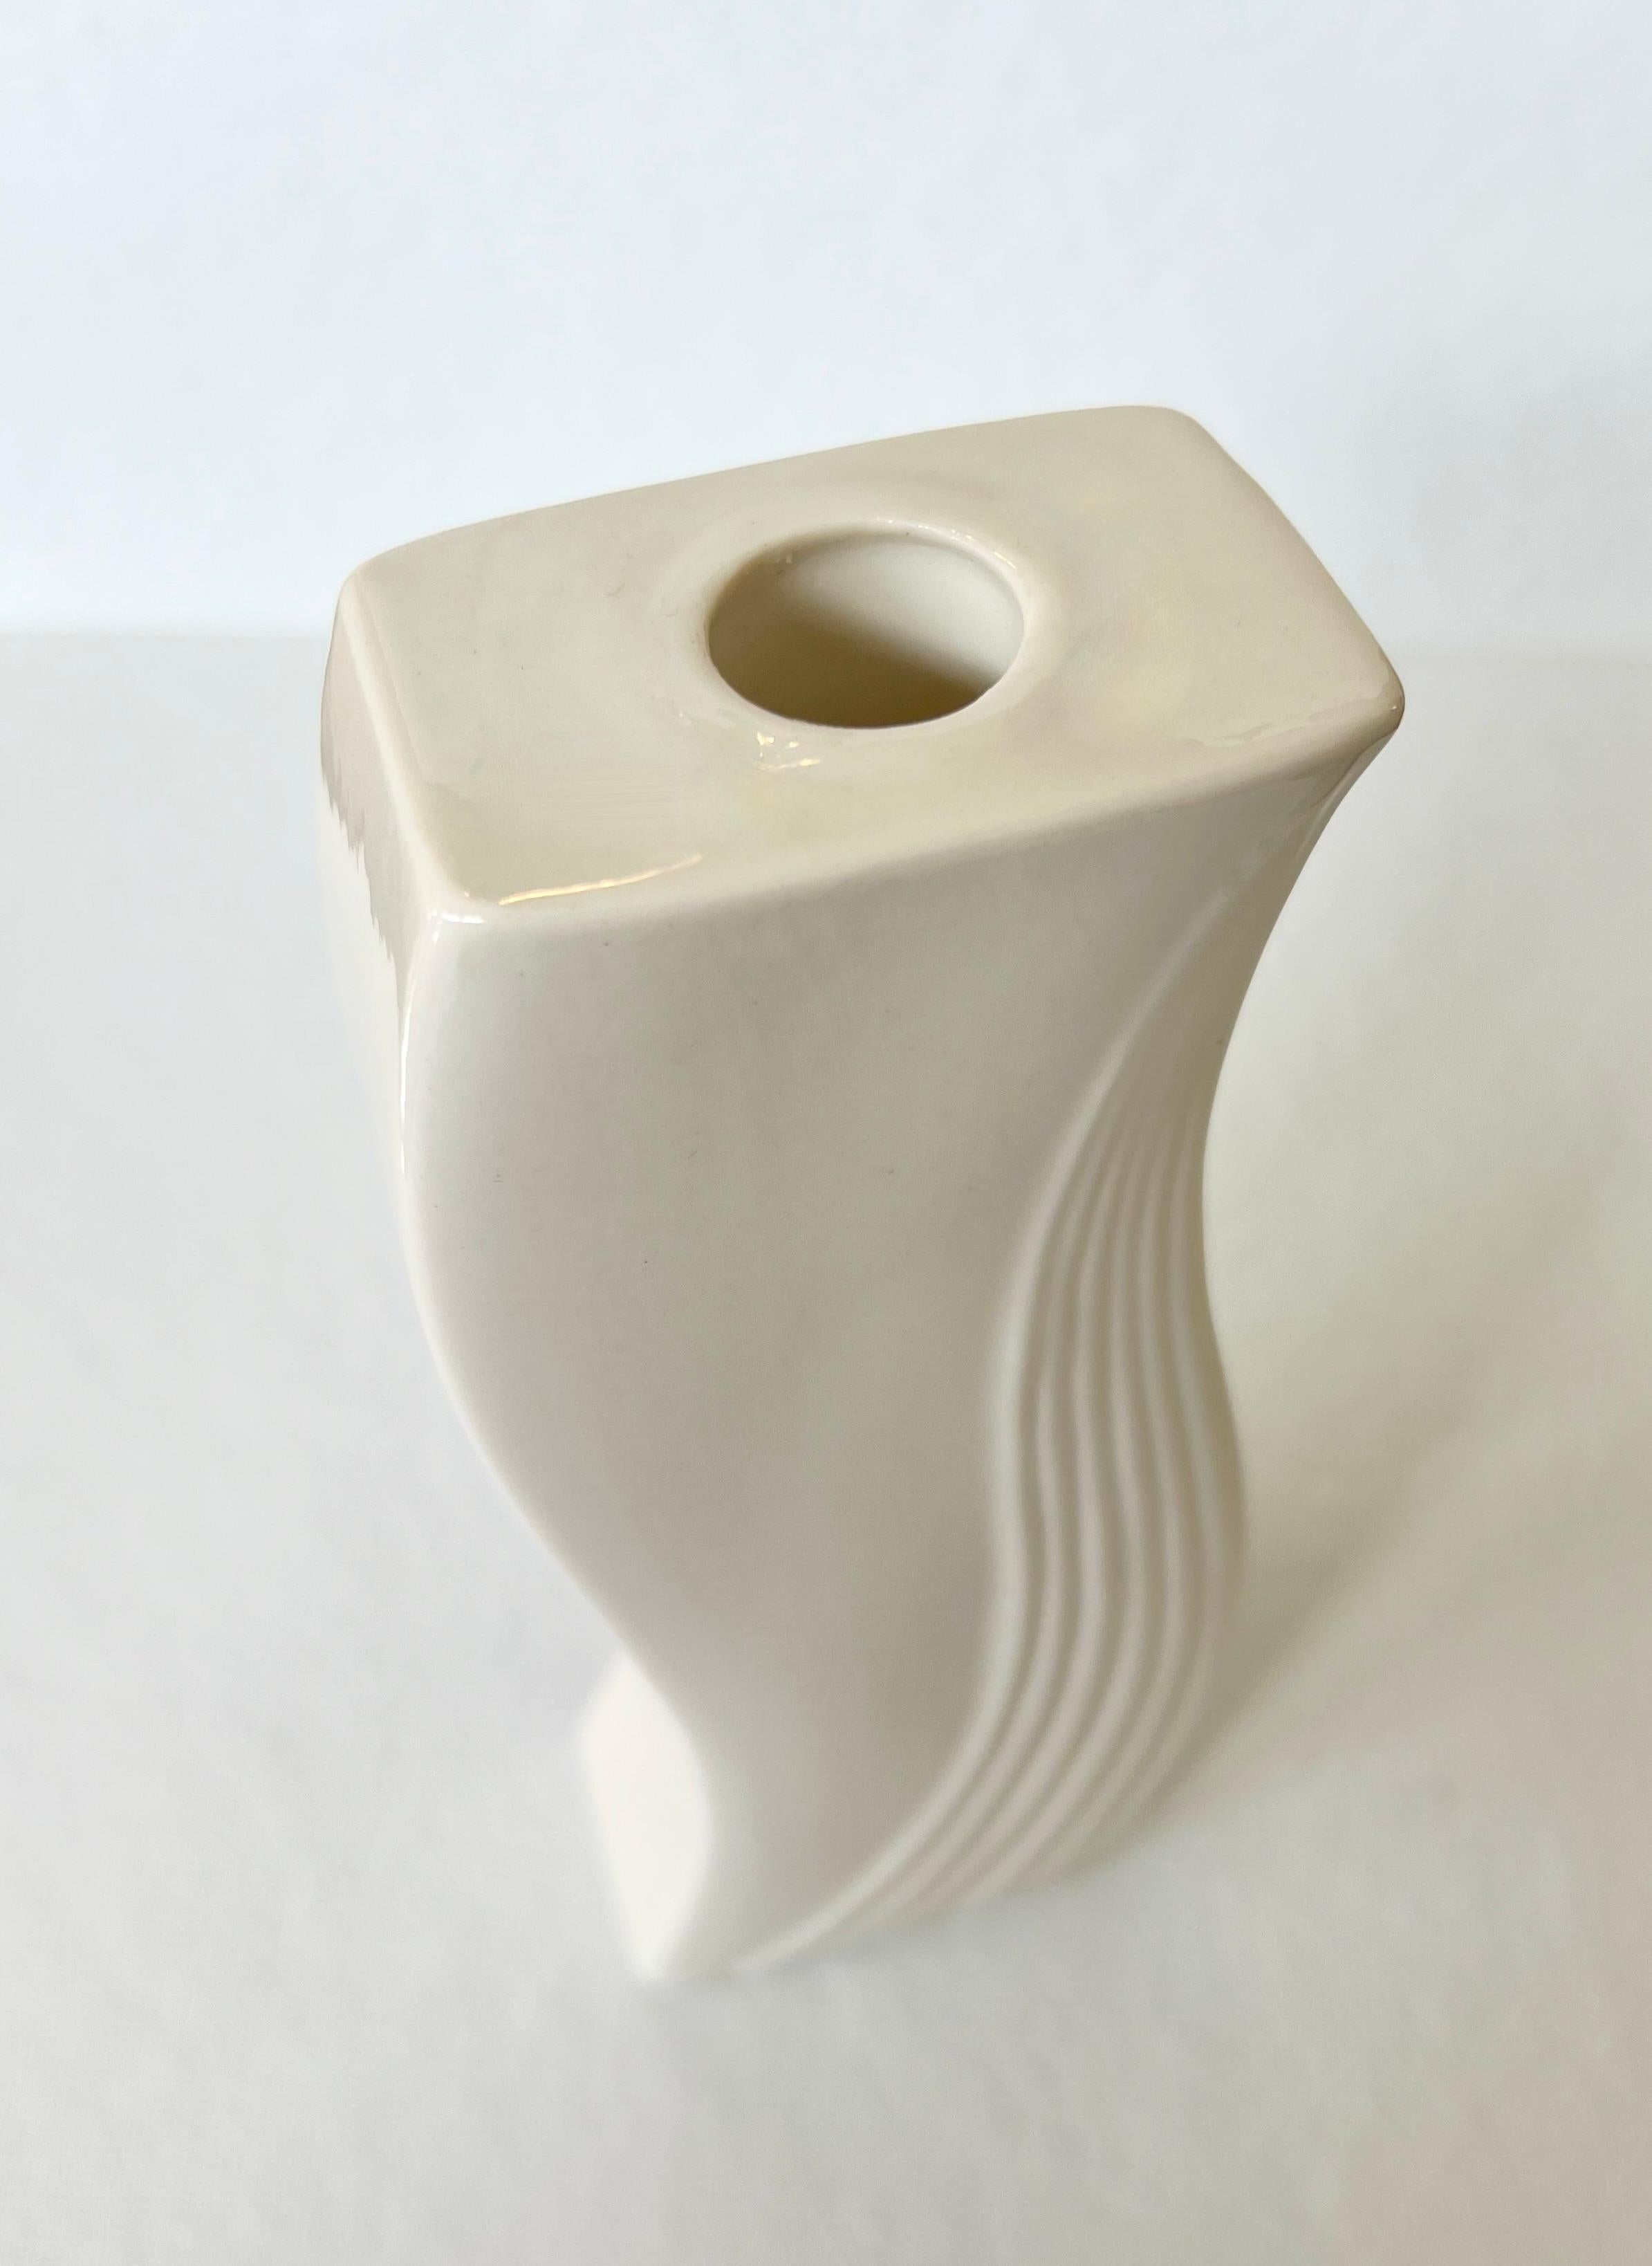 Art Deco Porcelain Cream Candlestick Candleholder by Beleek Pottery Ireland In Good Condition For Sale In Draper, UT